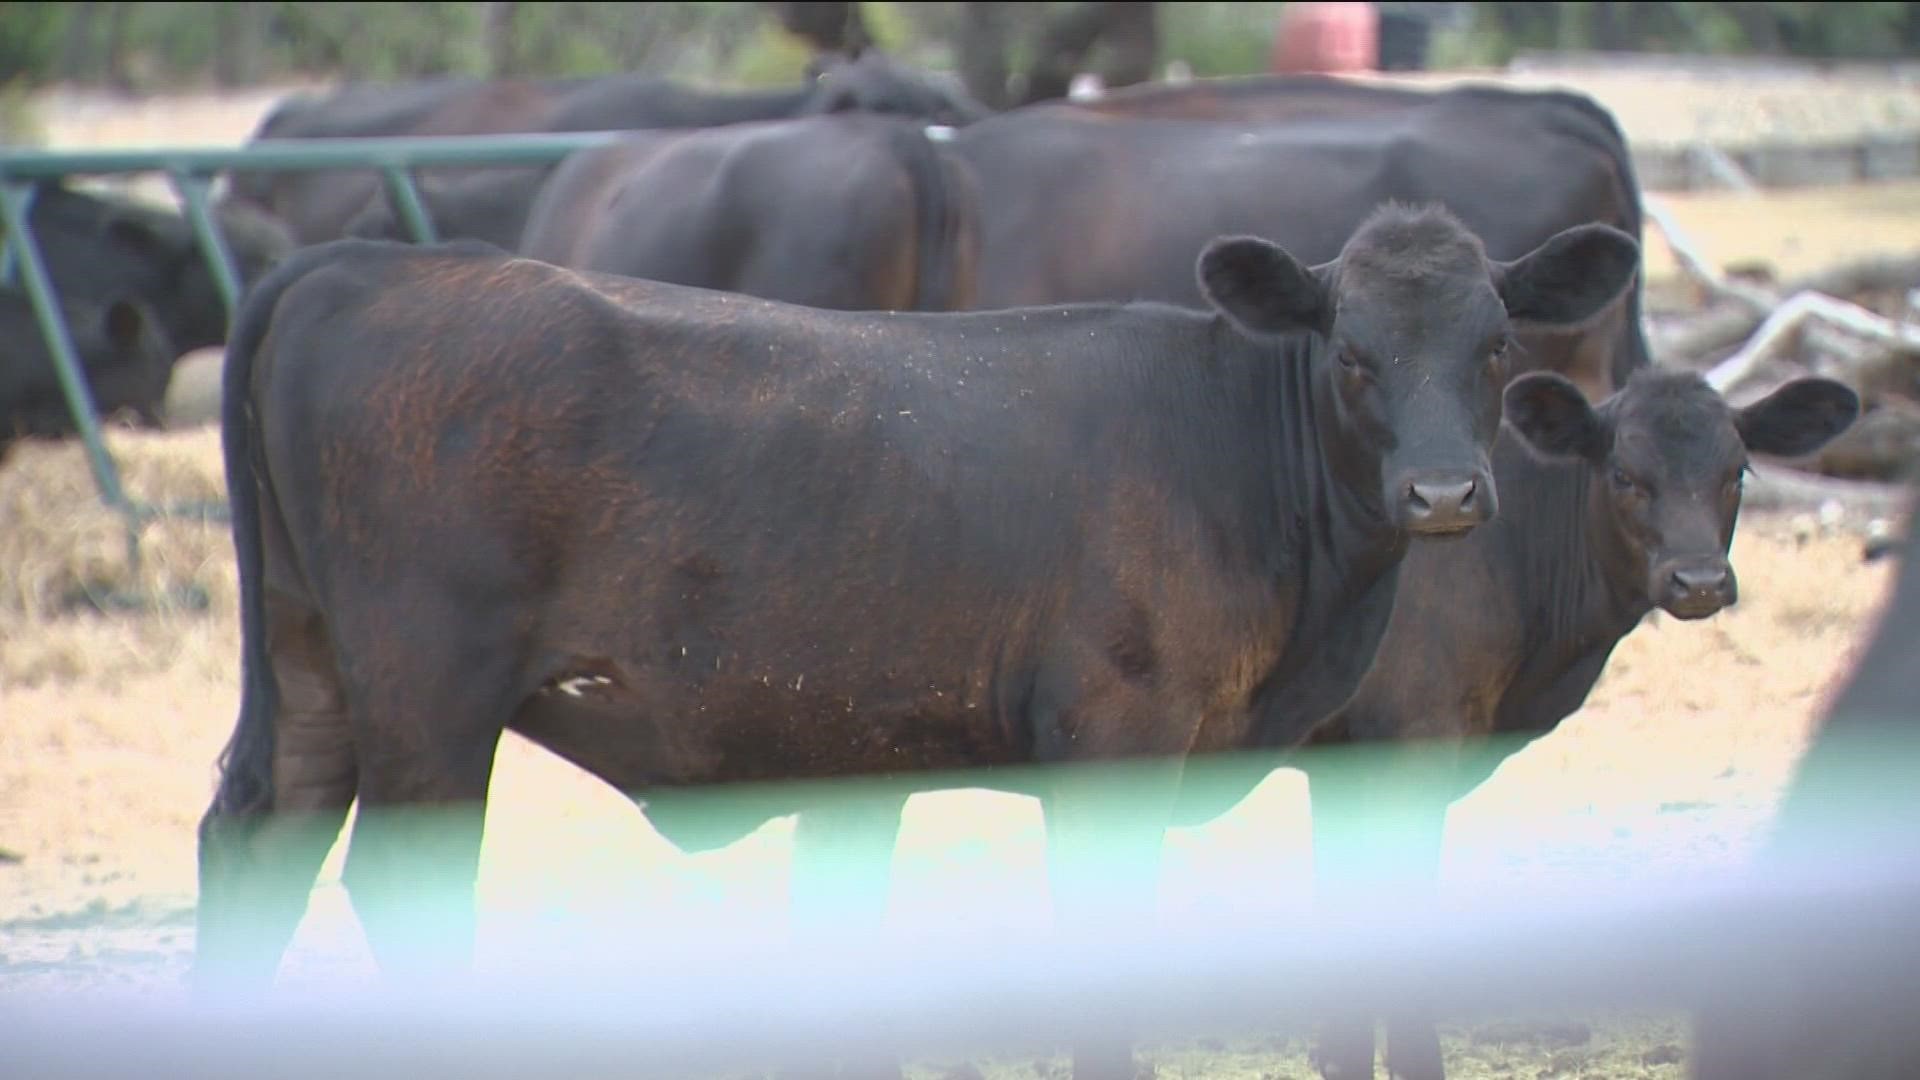 The drought is putting more pressure on a variety of industries. The dry conditions have ranchers praying for rain and being forced to make some difficult decisions.